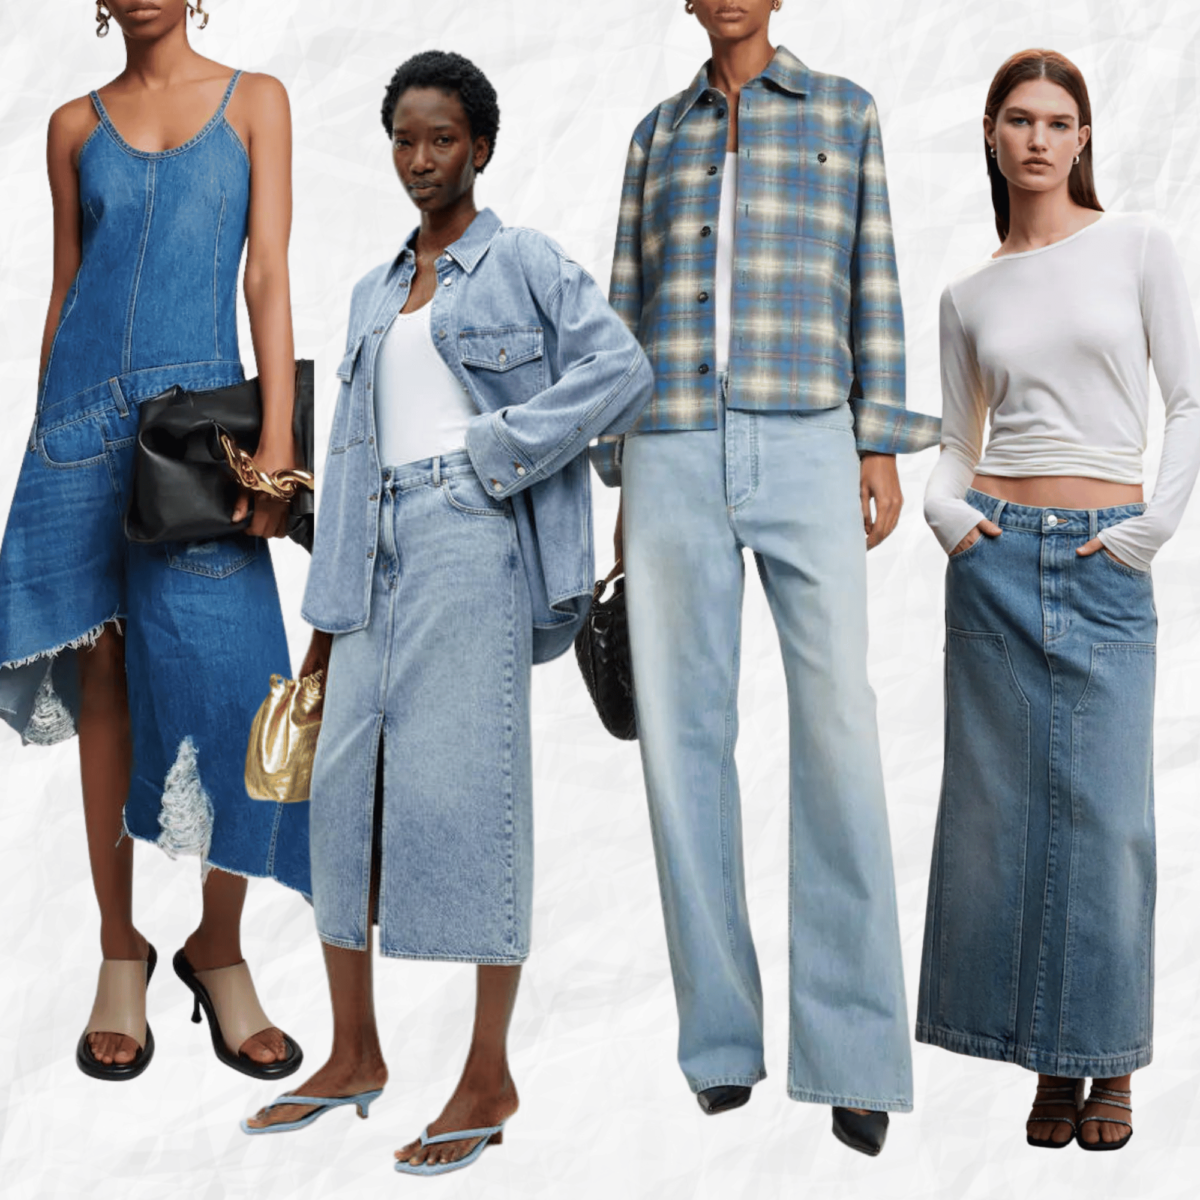 70s fashion inspo is a huge trend to shop for SS23